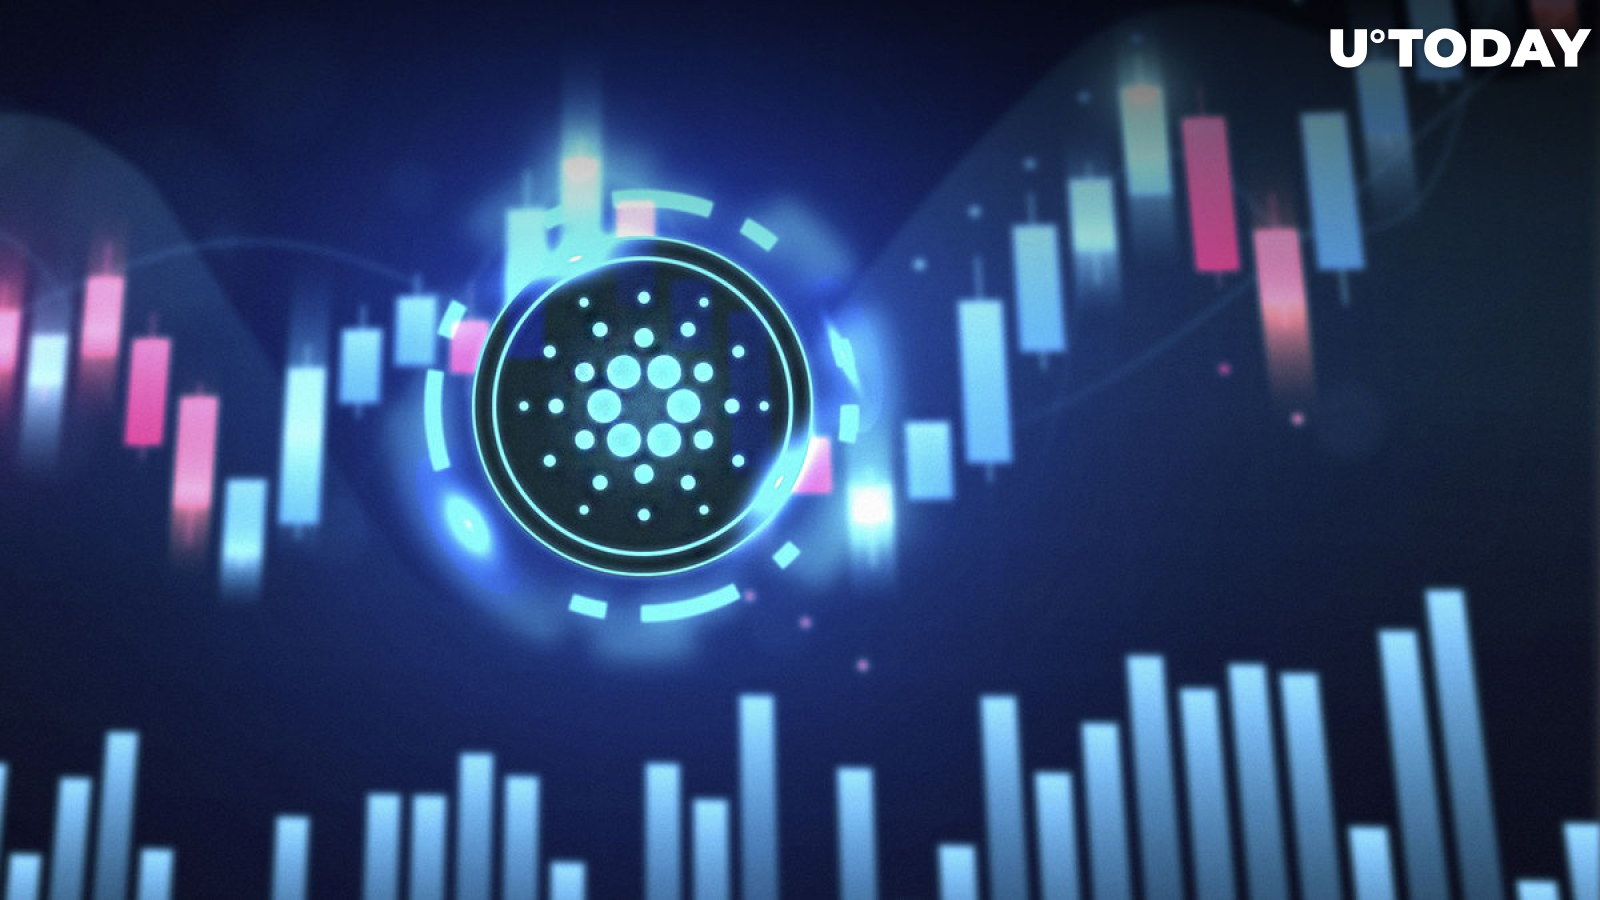 Cardano Altcoins' Prices Exploding, Crypto Capital Venture CEO Says There Will Be Big Dips